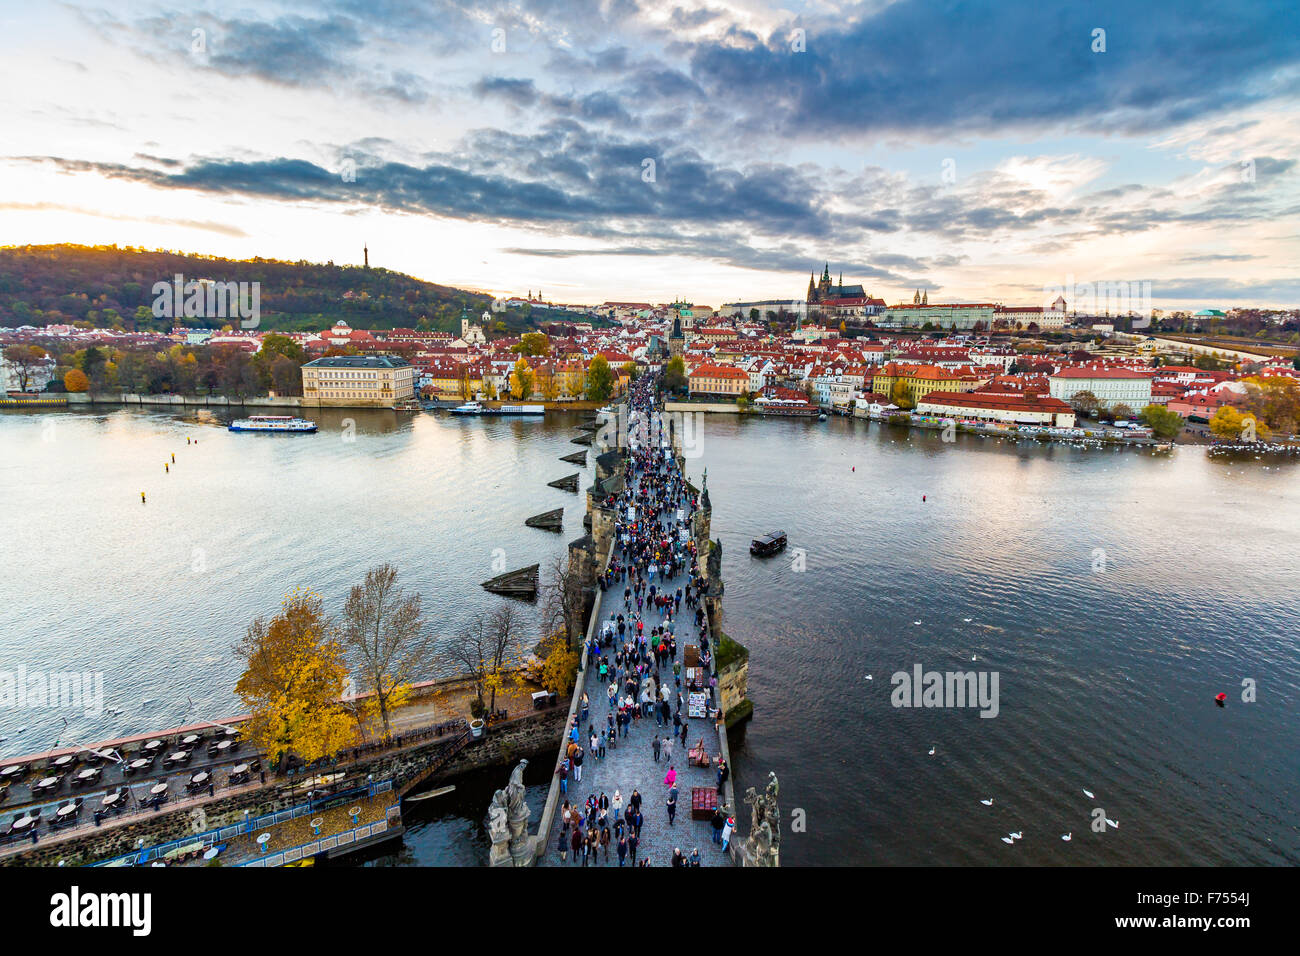 Scenic summer evening panorama of the Old Town architecture with Vltava river, Charles Bridge and St.Vitus Cathedral in Prague, Stock Photo